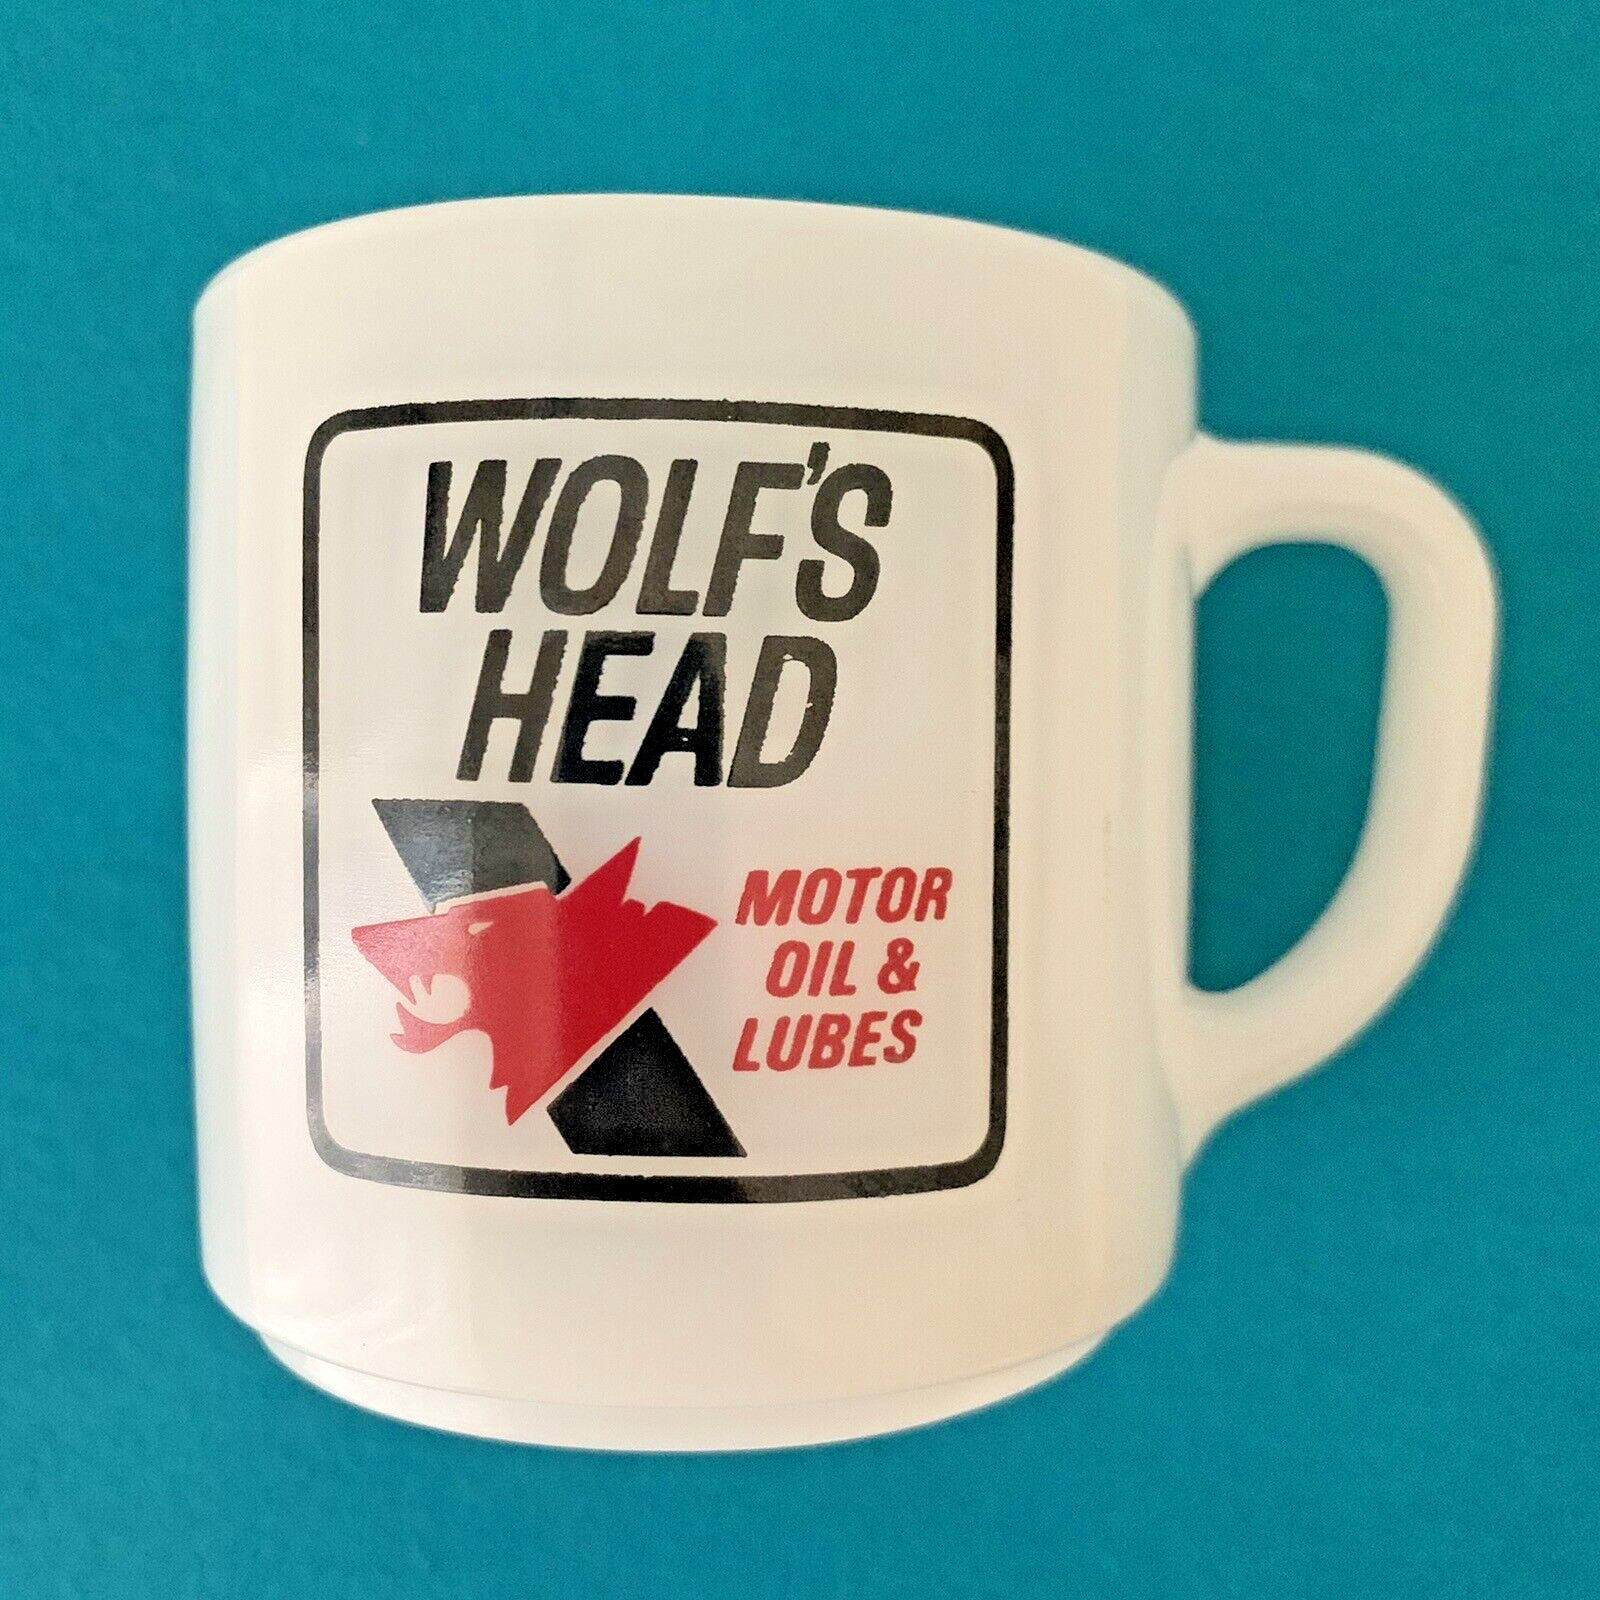 Vintage Wolf’s Head Motor Oil & Lubes Coffee Mug Cup - Advertising by Fire King